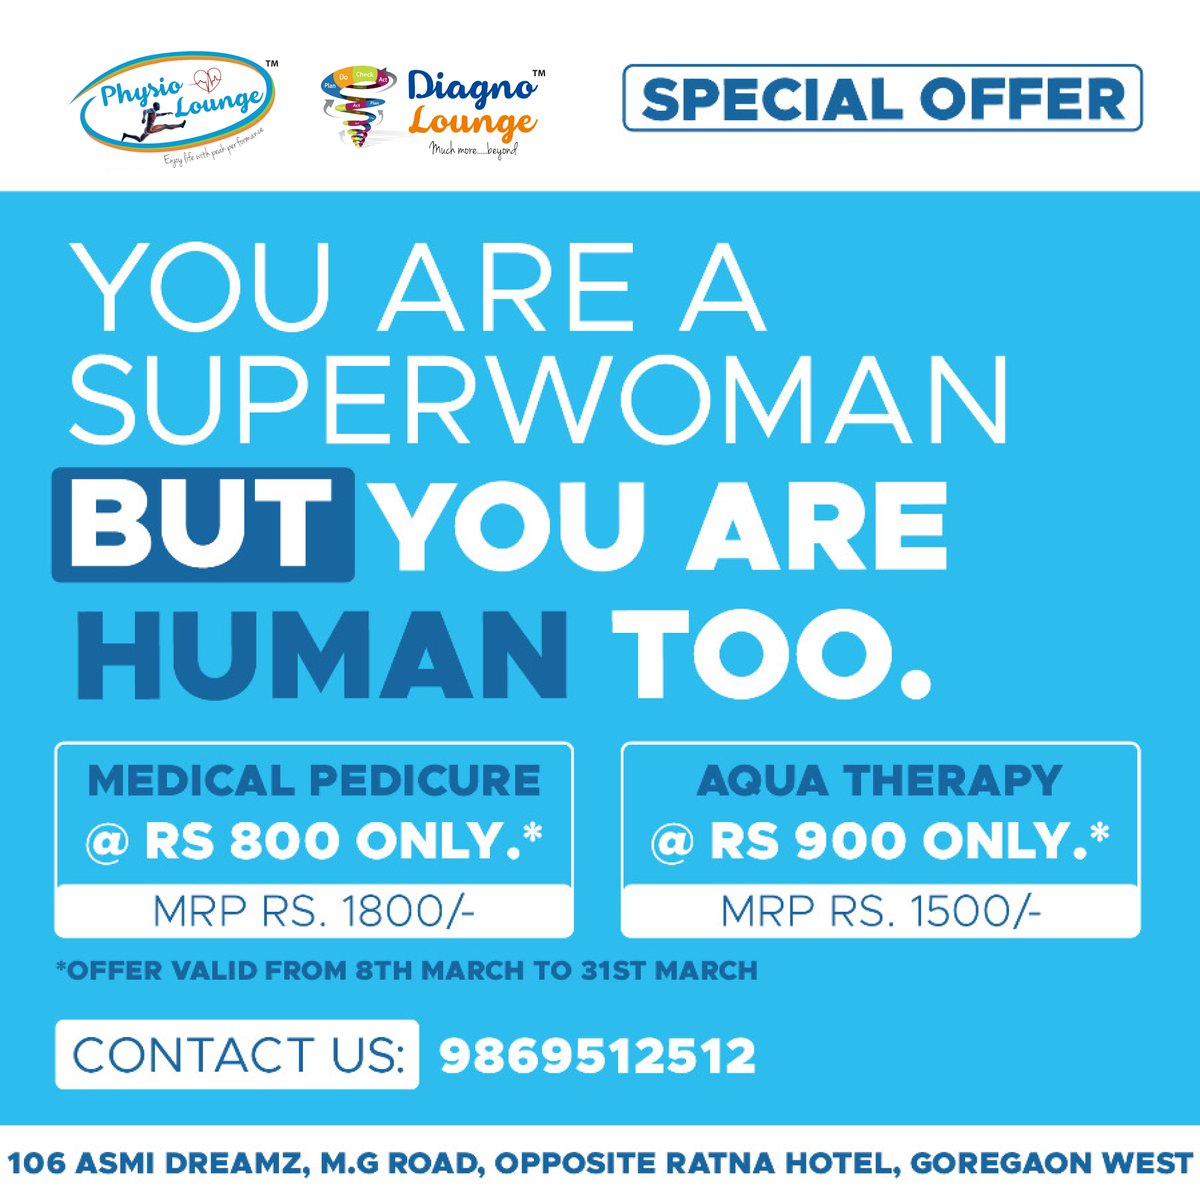 Hey there woman!
Smile. It's your day.
& we're making it your month.
The offer is valid till 31st march.
Let's grab before you forget about it while being the Superwoman.

#womensday #internationalwomensday #womensday2023 #physiolounge #diagnolounge #mumbai #wednesday #Twitter